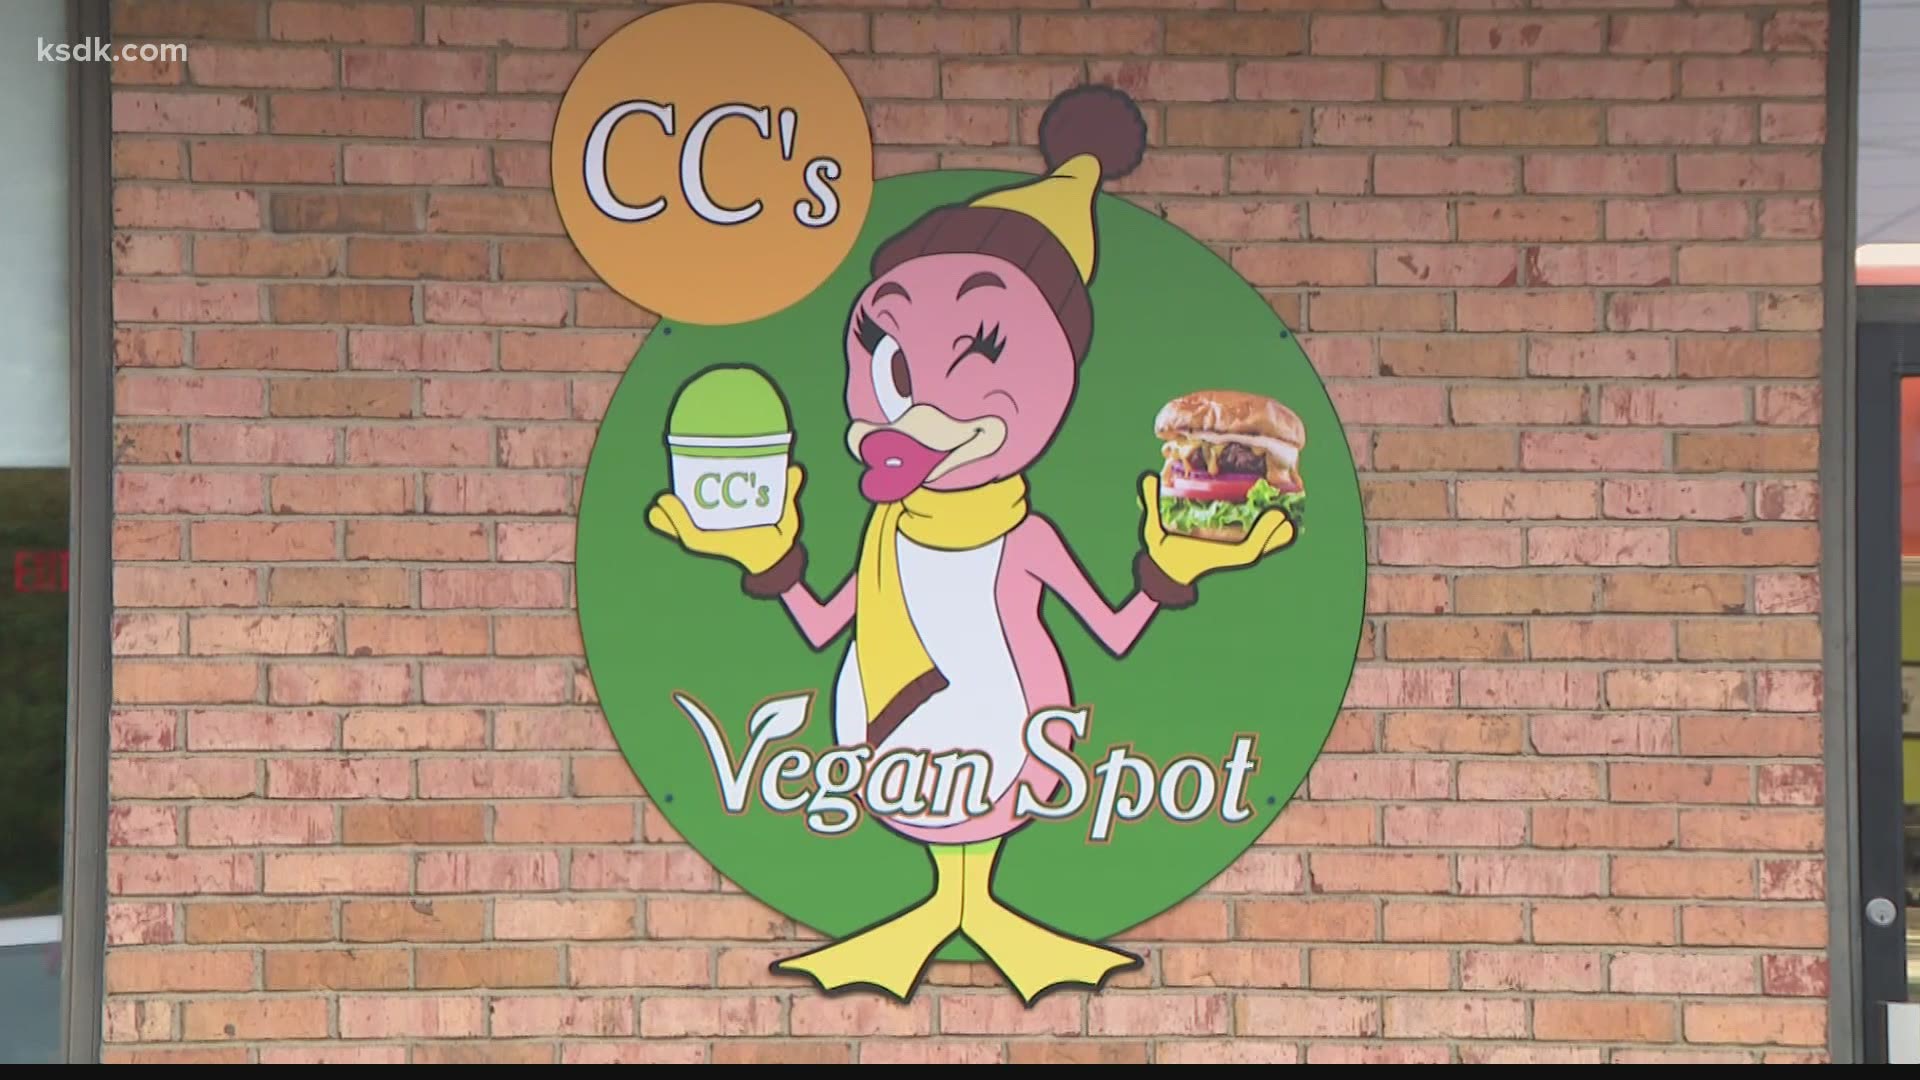 It all started with the Icees, and from there, it has become a full vegan restaurant that offers a wide variety of vegan dishes.